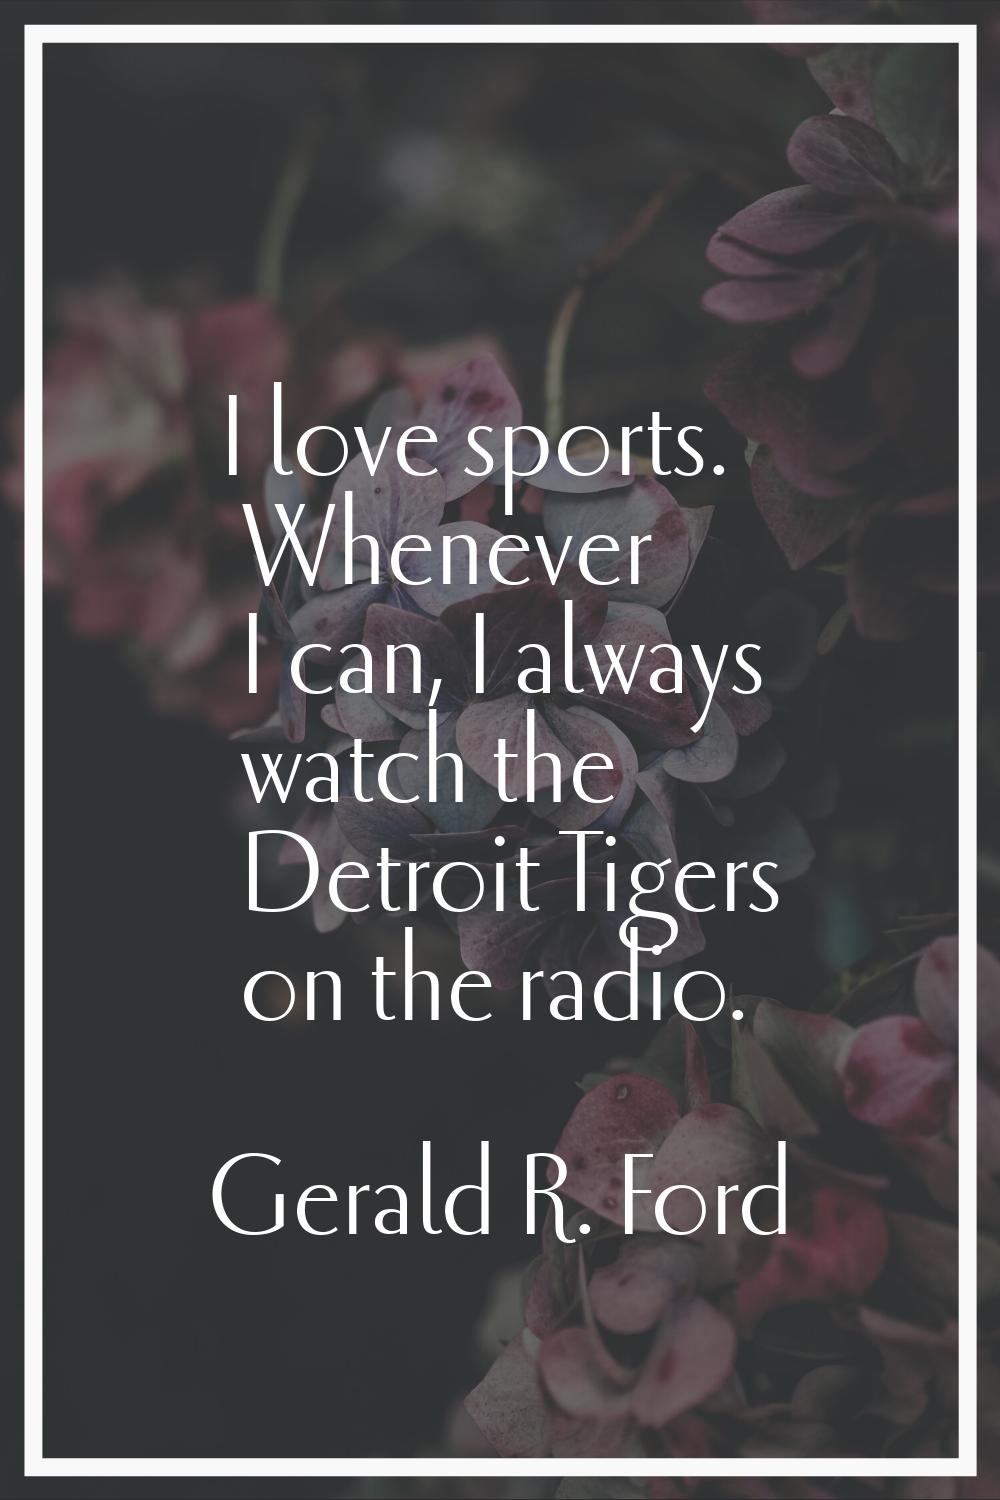 I love sports. Whenever I can, I always watch the Detroit Tigers on the radio.